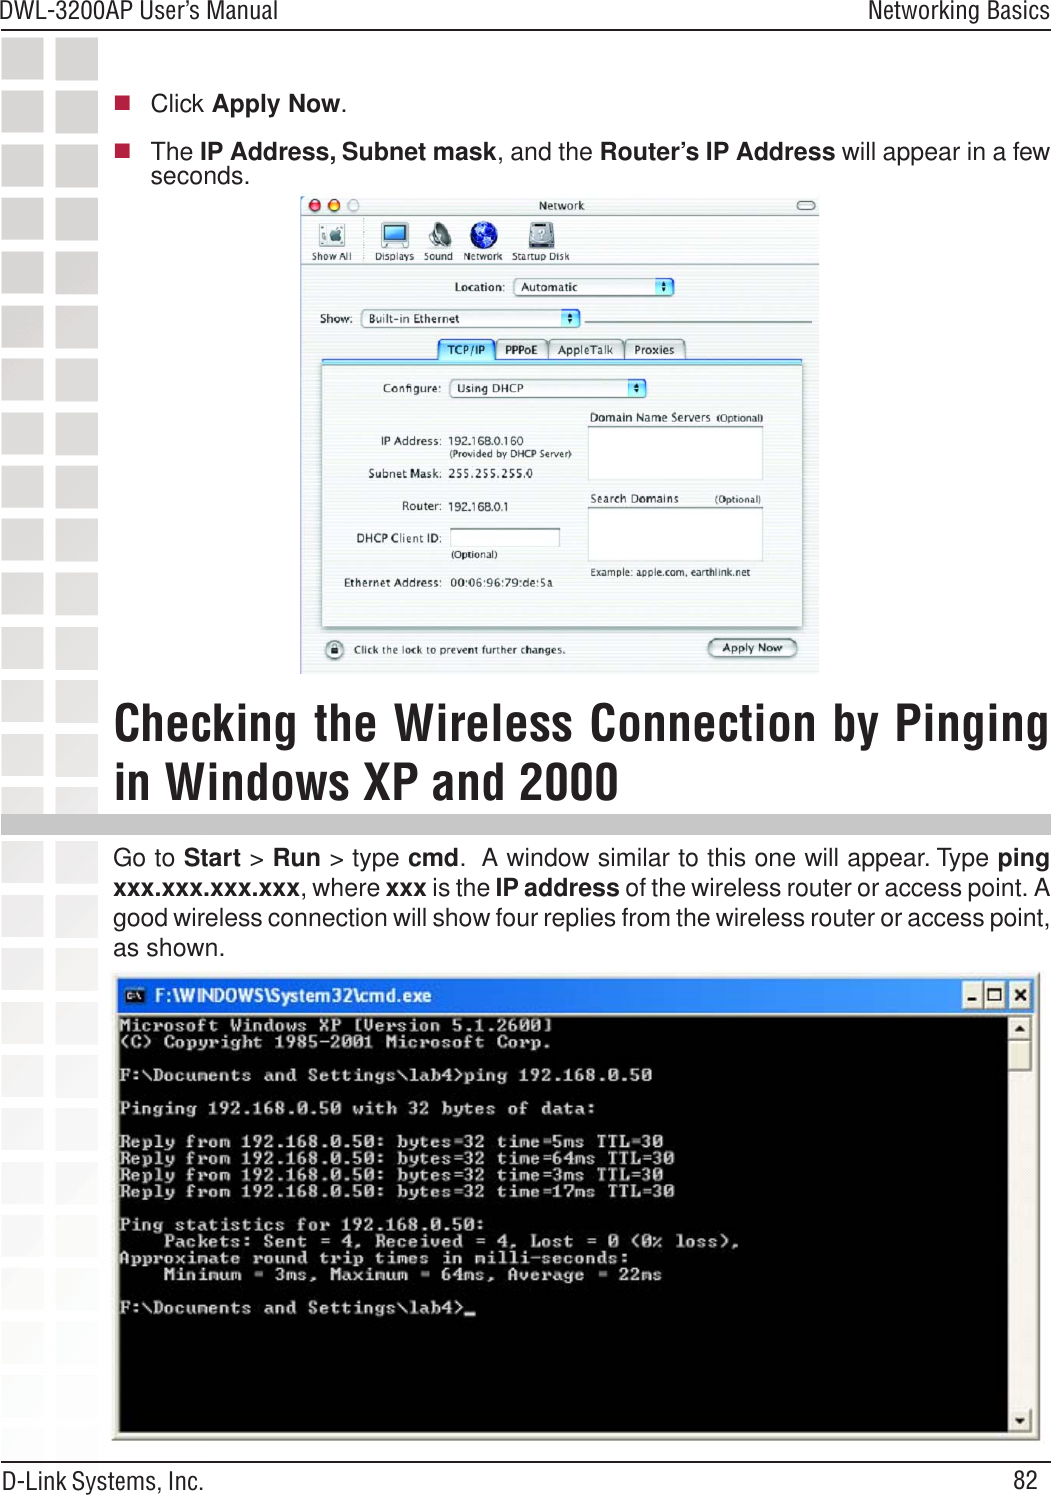 82DWL-3200AP User’s ManualD-Link Systems, Inc.Networking BasicsClick Apply Now.The IP Address, Subnet mask, and the Router’s IP Address will appear in a fewseconds.Go to Start &gt; Run &gt; type cmd.  A window similar to this one will appear. Type pingxxx.xxx.xxx.xxx, where xxx is the IP address of the wireless router or access point. Agood wireless connection will show four replies from the wireless router or access point,as shown.Checking the Wireless Connection by Pingingin Windows XP and 2000